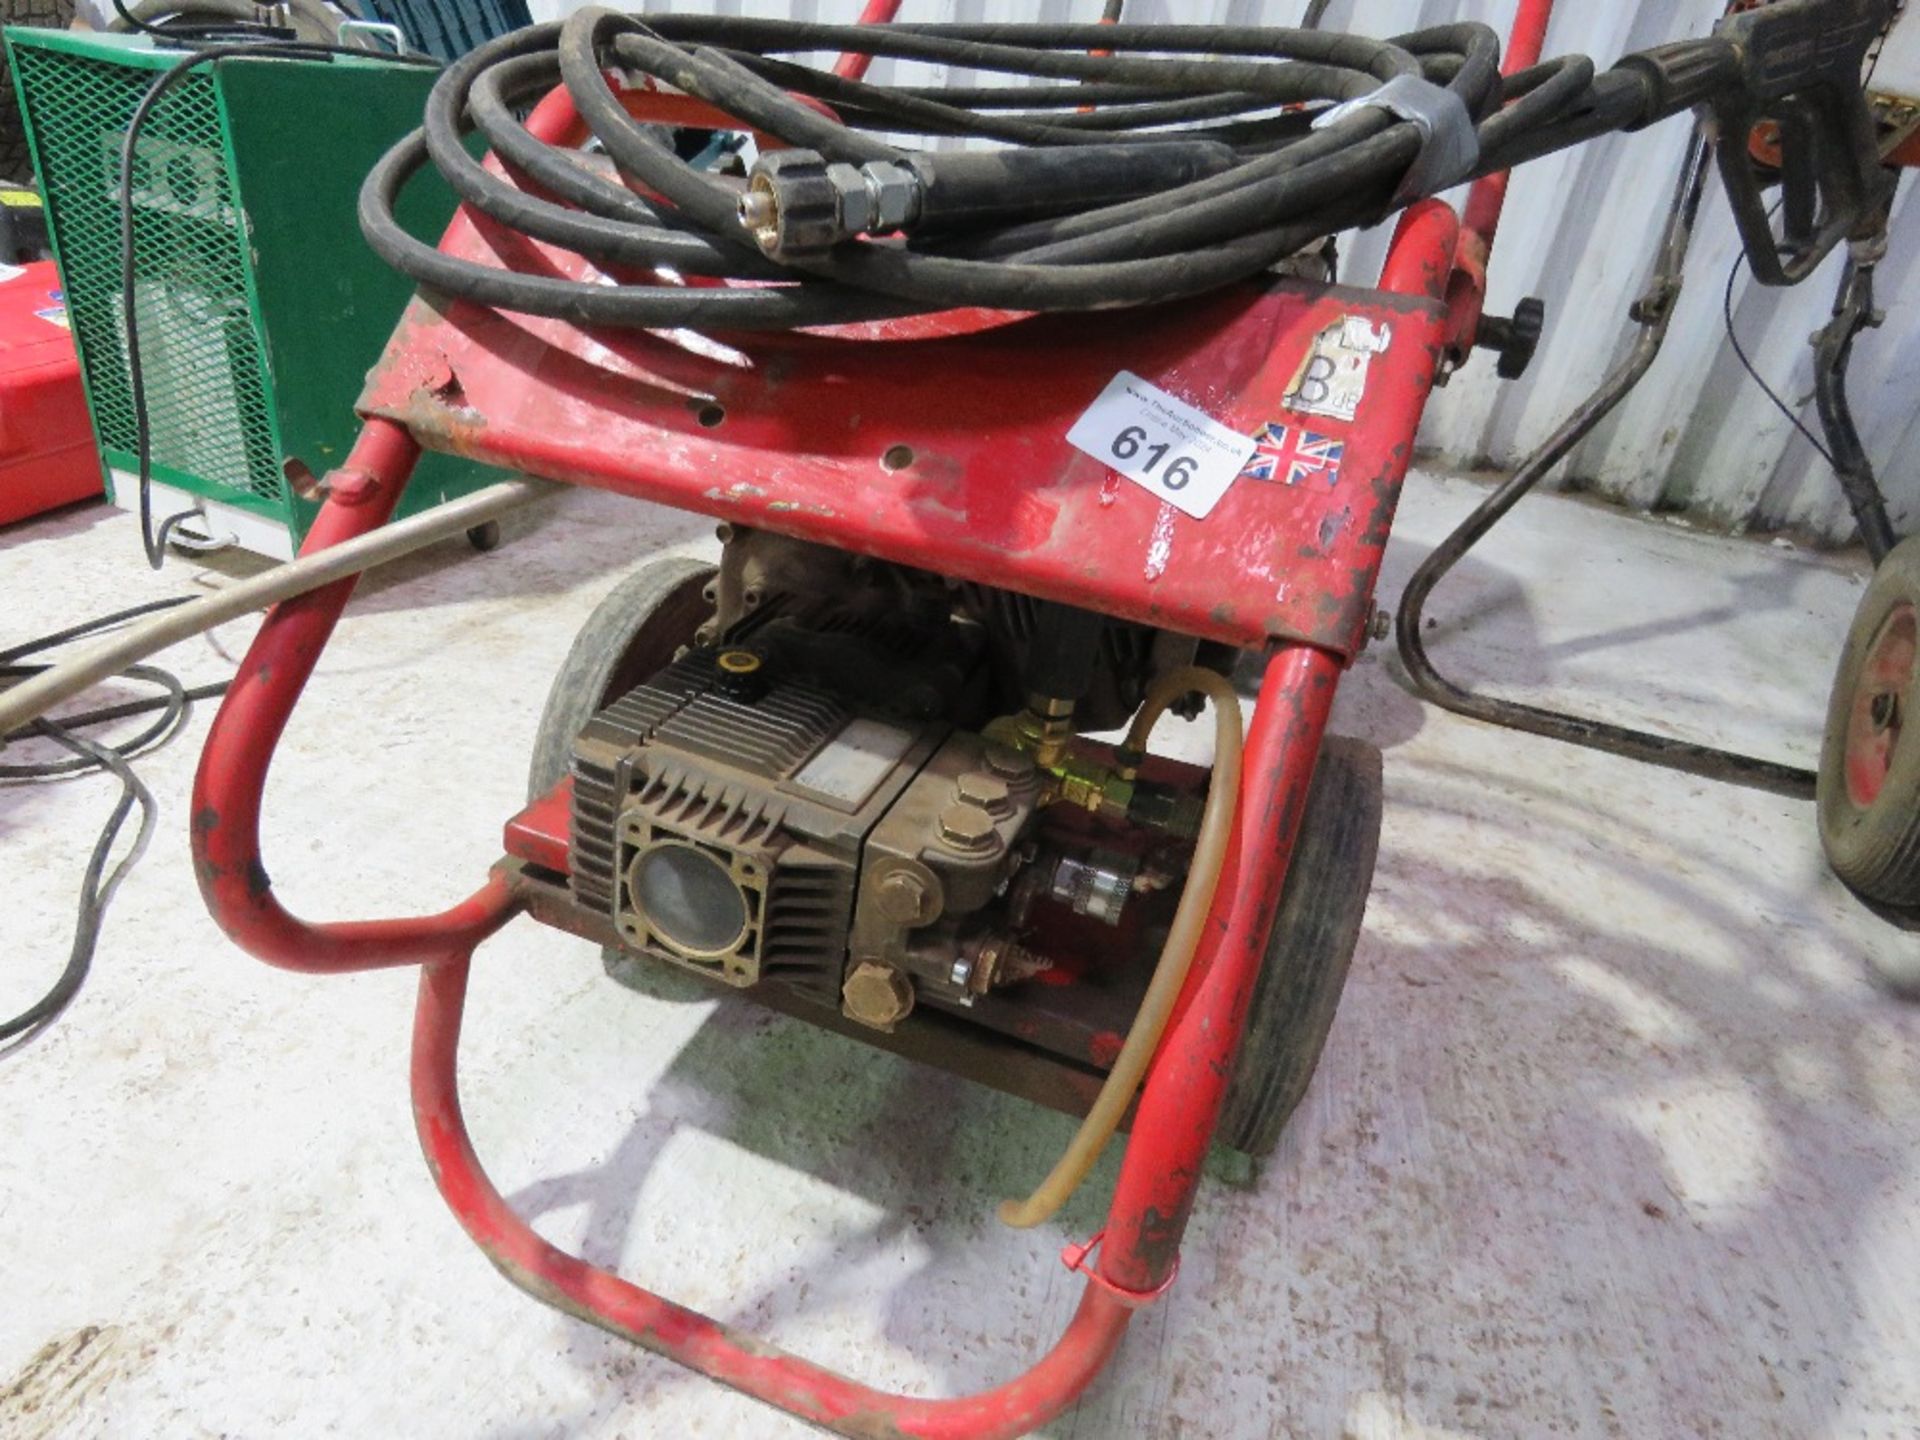 PETROL ENGINED PRESSURE WASHER WITH HOSE AND LANCE. - Image 3 of 6